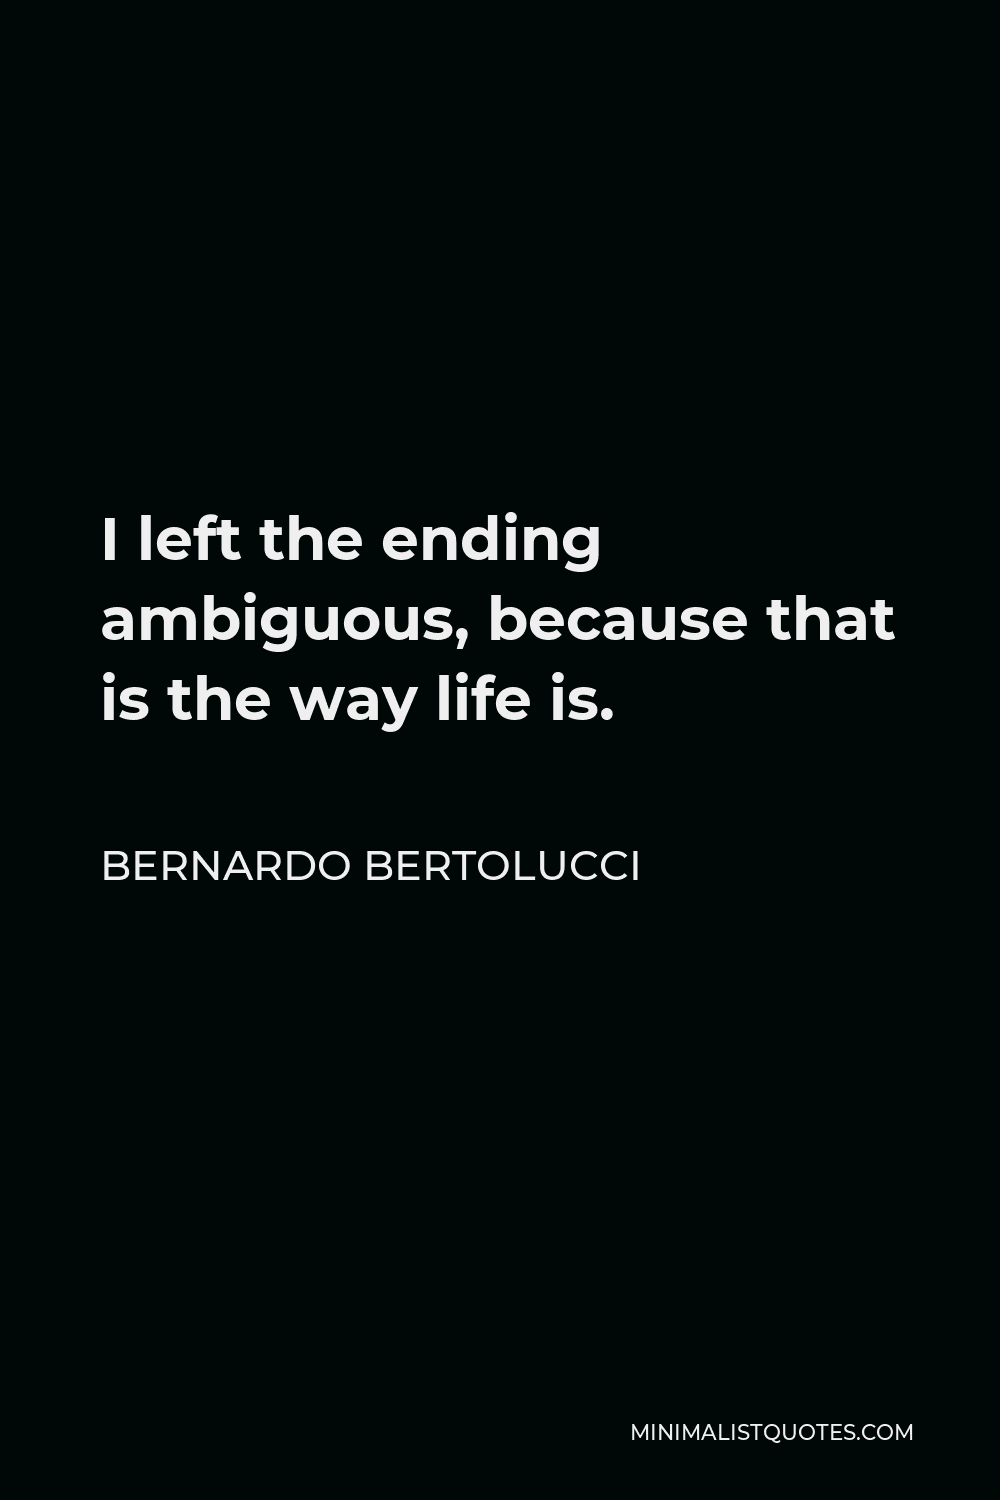 Bernardo Bertolucci Quote - I left the ending ambiguous, because that is the way life is.